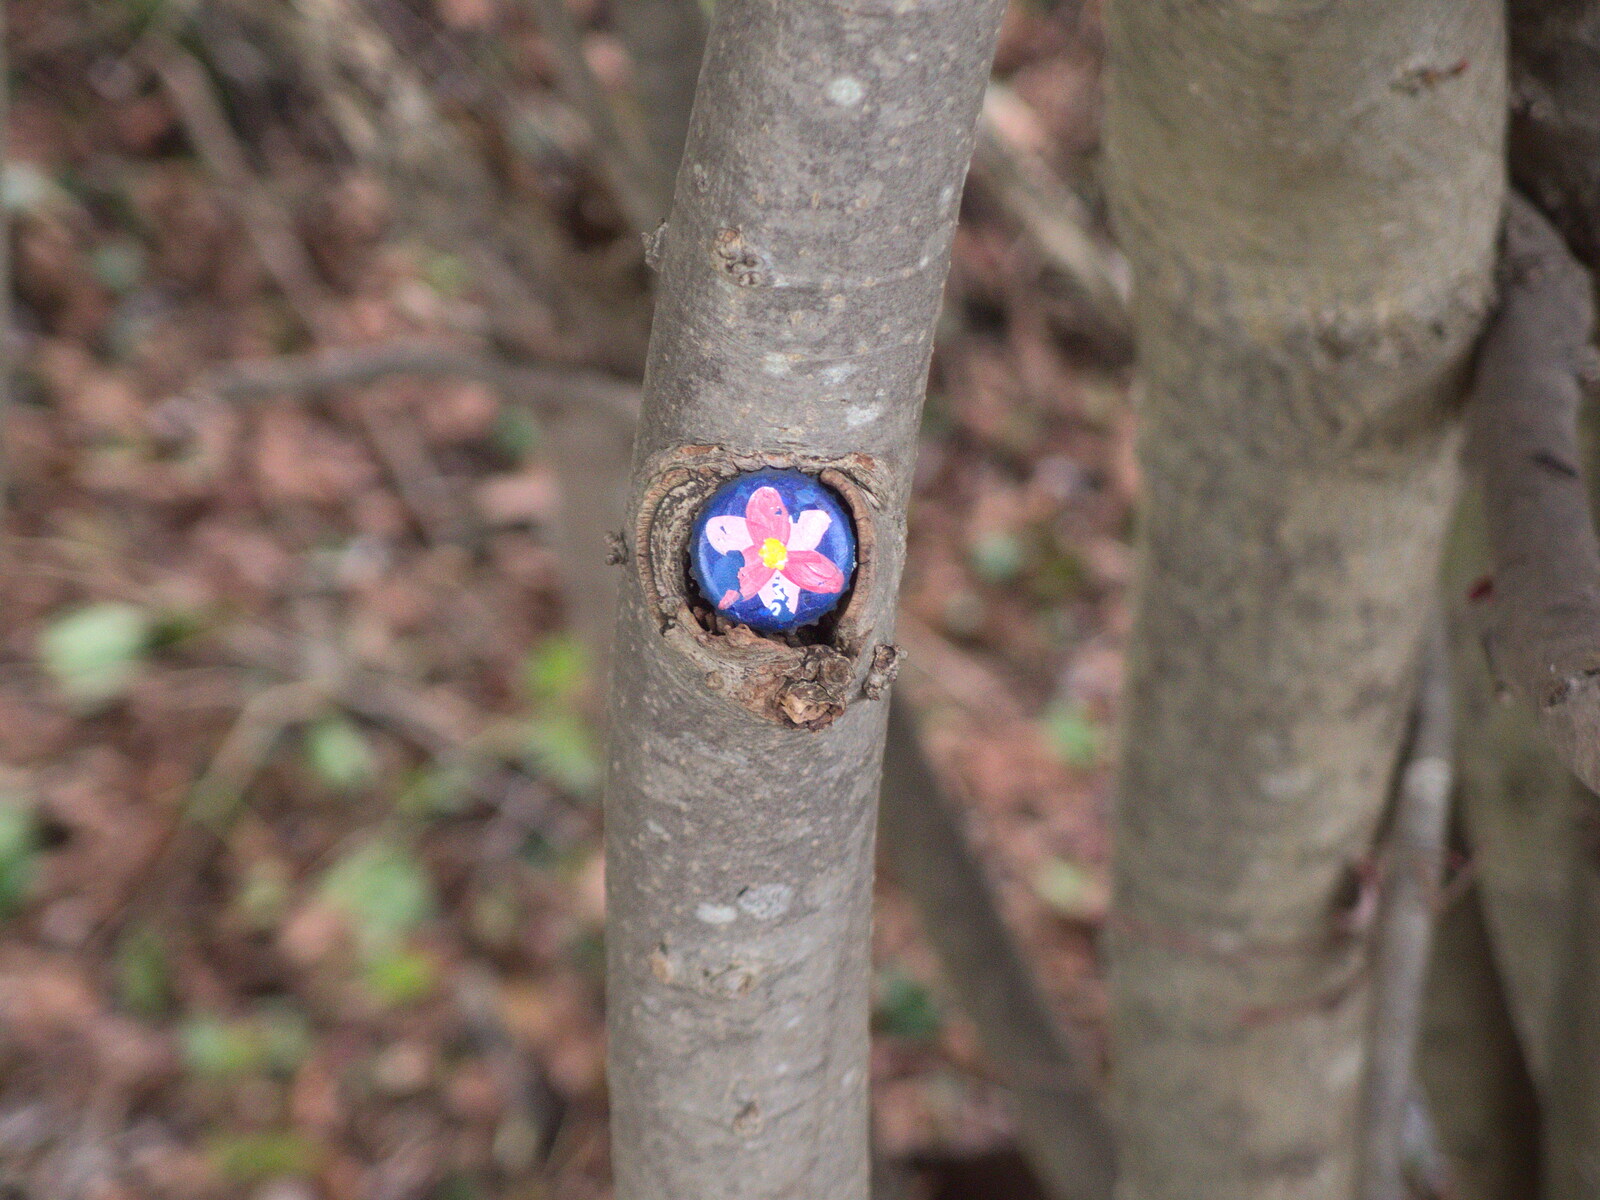 A Wander around Fair Green, Diss, Norfolk - 11th January 2023: Painted bottle tops on Moorhall Causeway